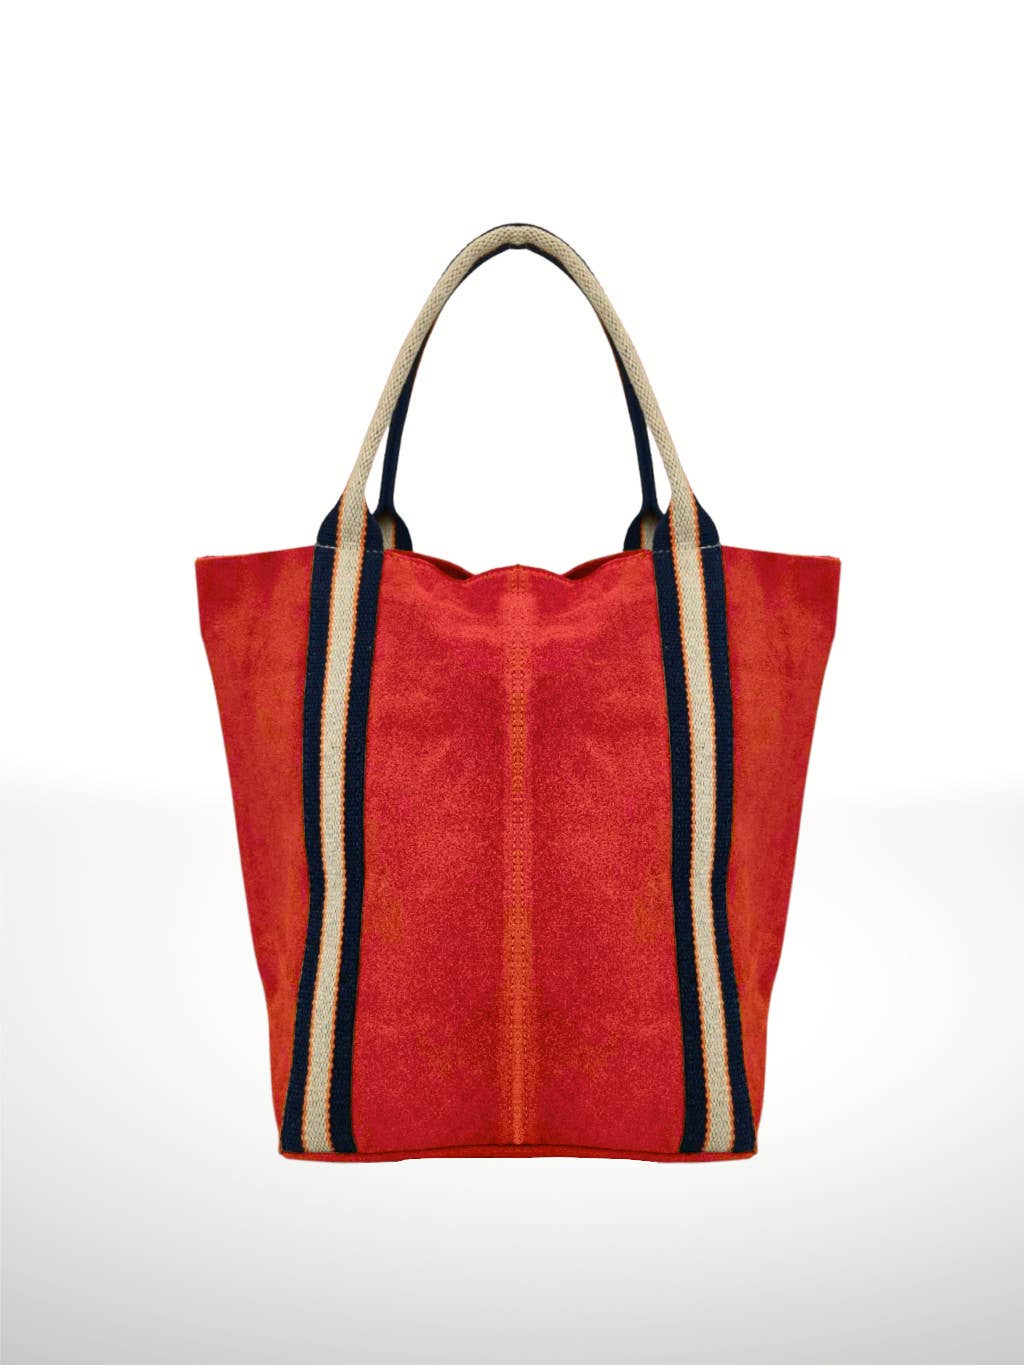 Melody Suede leather bag- red